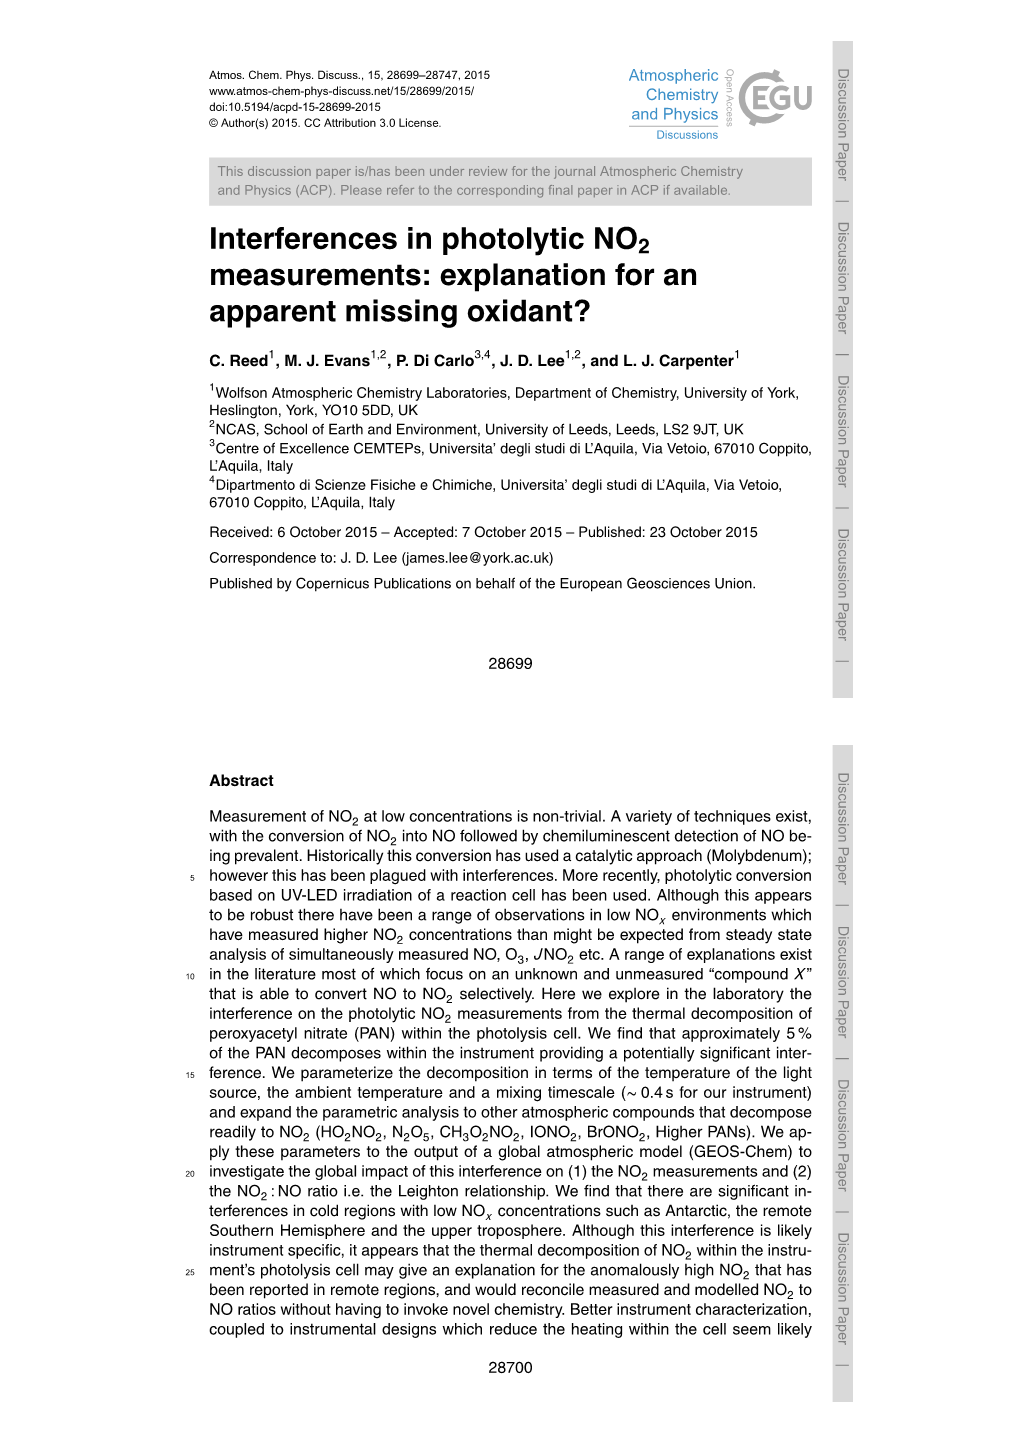 Interferences in Photolytic NO2 Measurements: Explanation for An